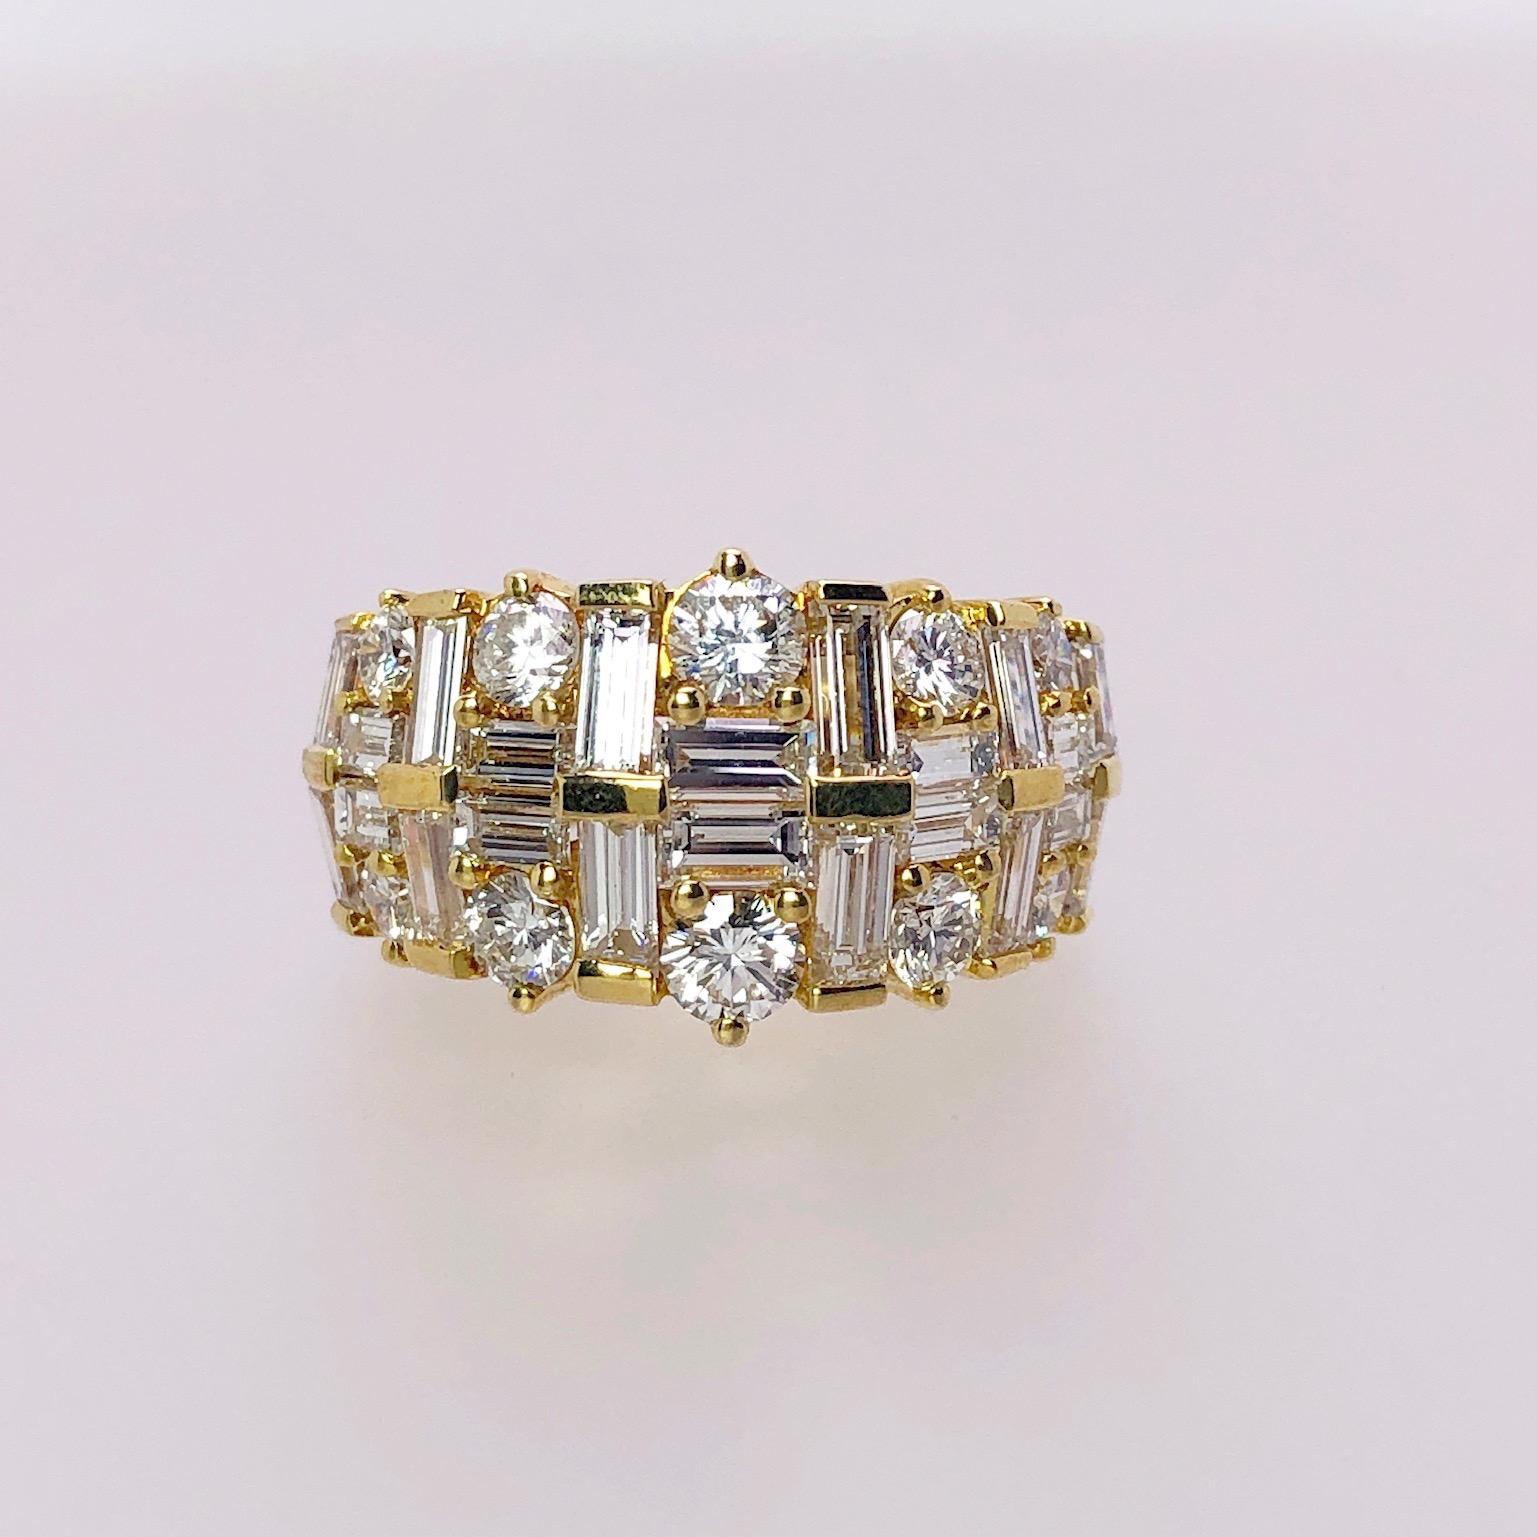 This 18 karat yellow gold ring was designed by Nova. A beautiful setting highlighting Round and Baguette cut Diamonds . The Diamonds are set in a basket weaved type setting allowing the  brilliance of each cut to sparkle beautifully.
Ring size 6.5 